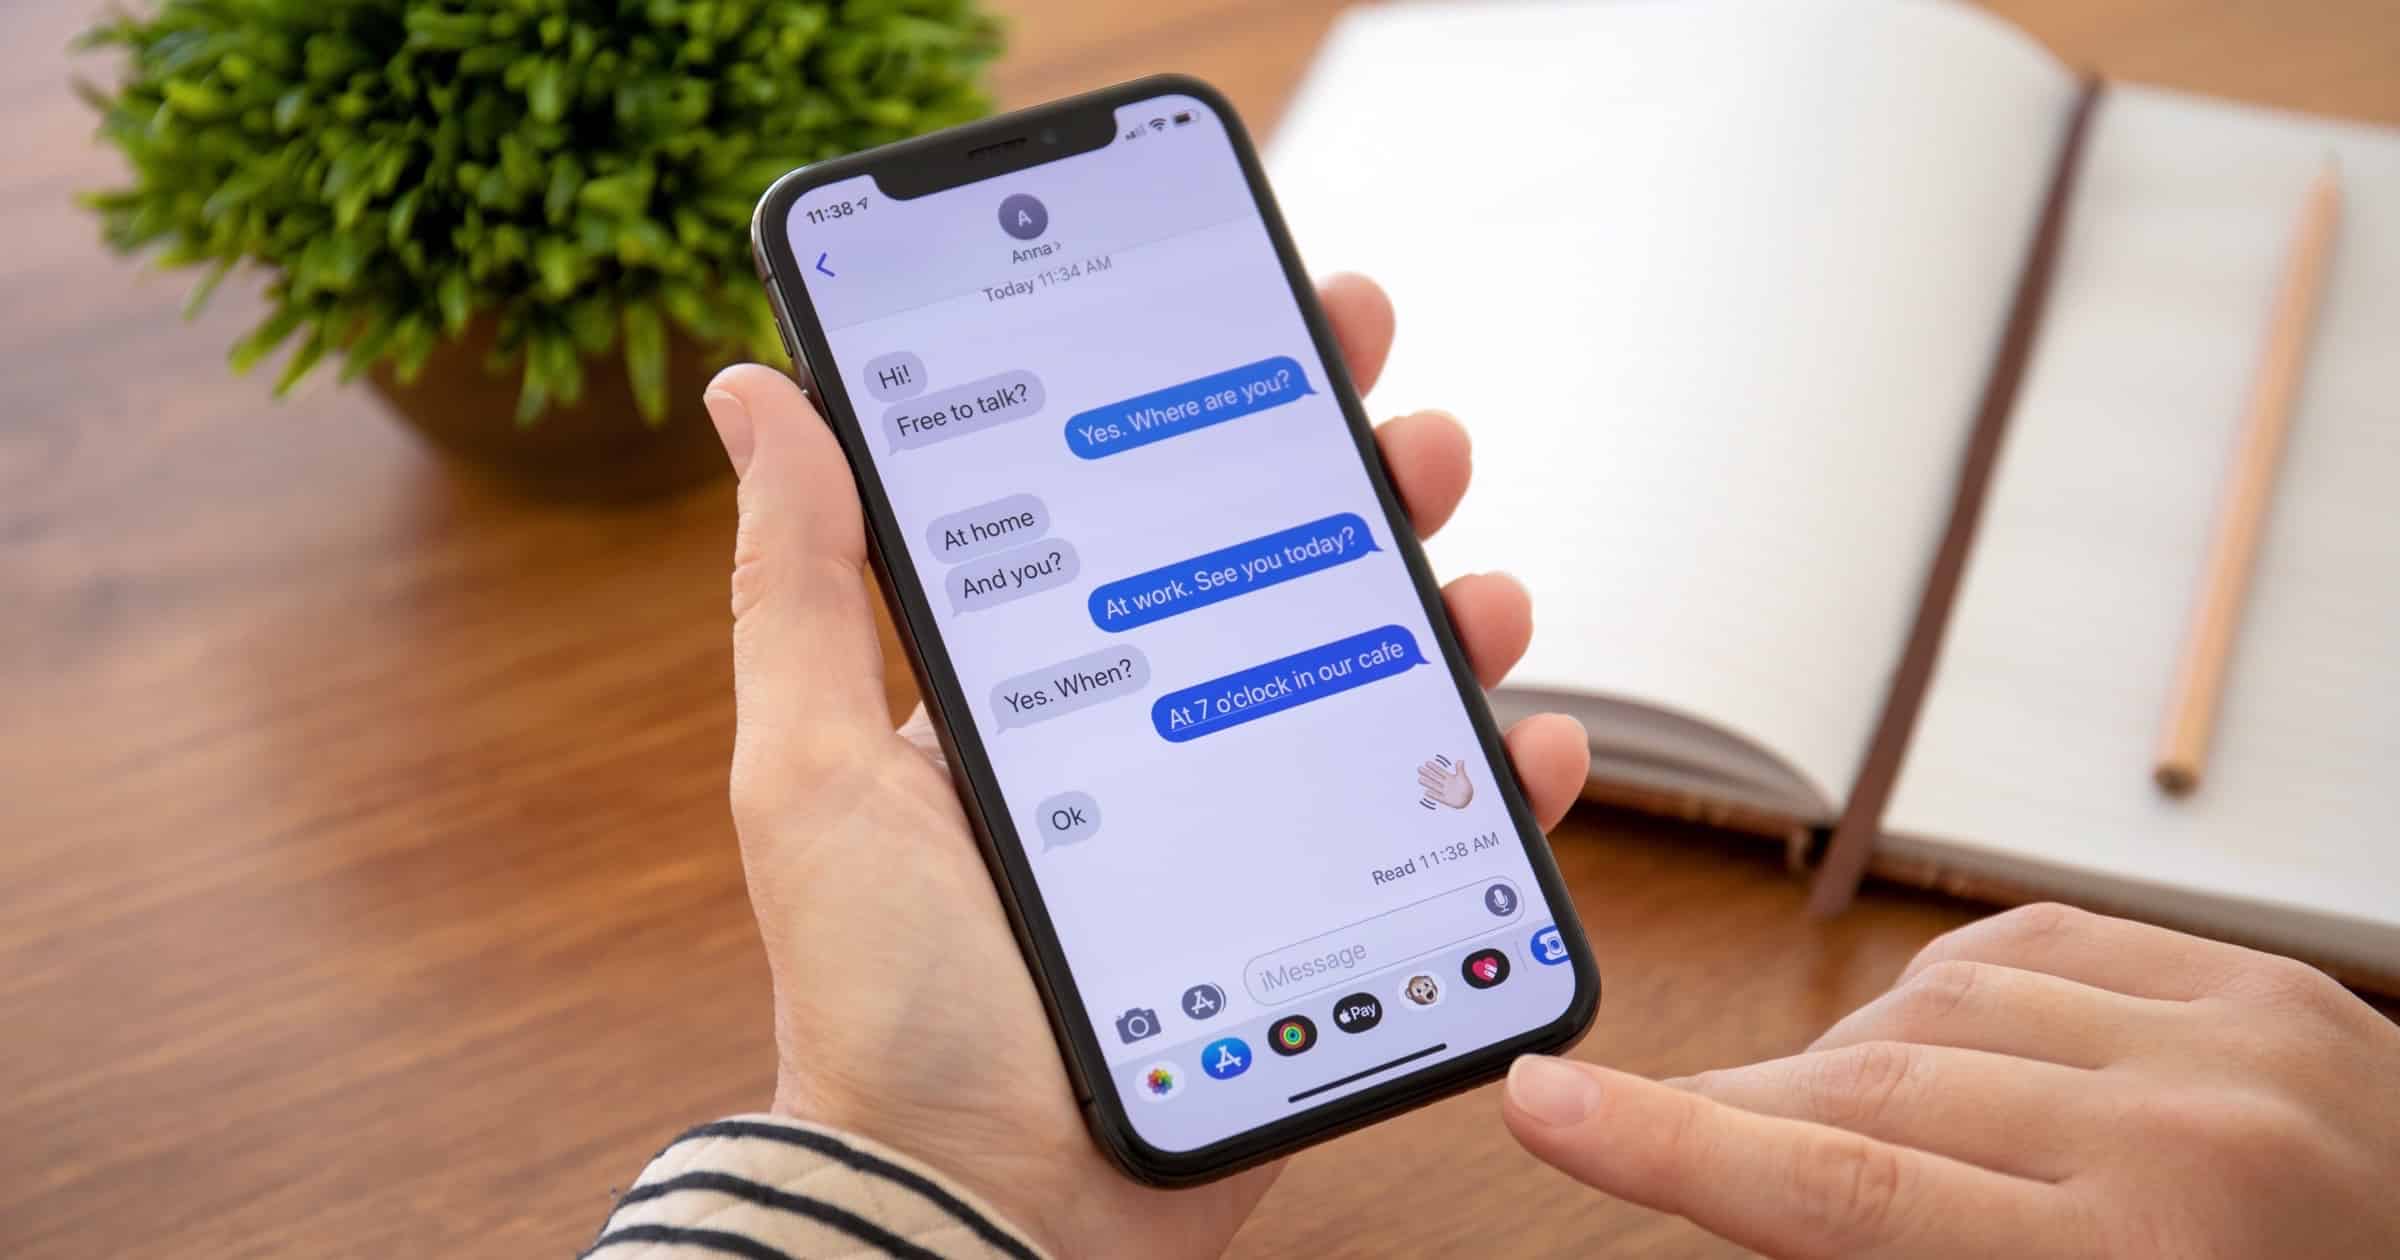 Alert for iPhone Users: Should You Turn Off iMessage to Avoid Hackers?